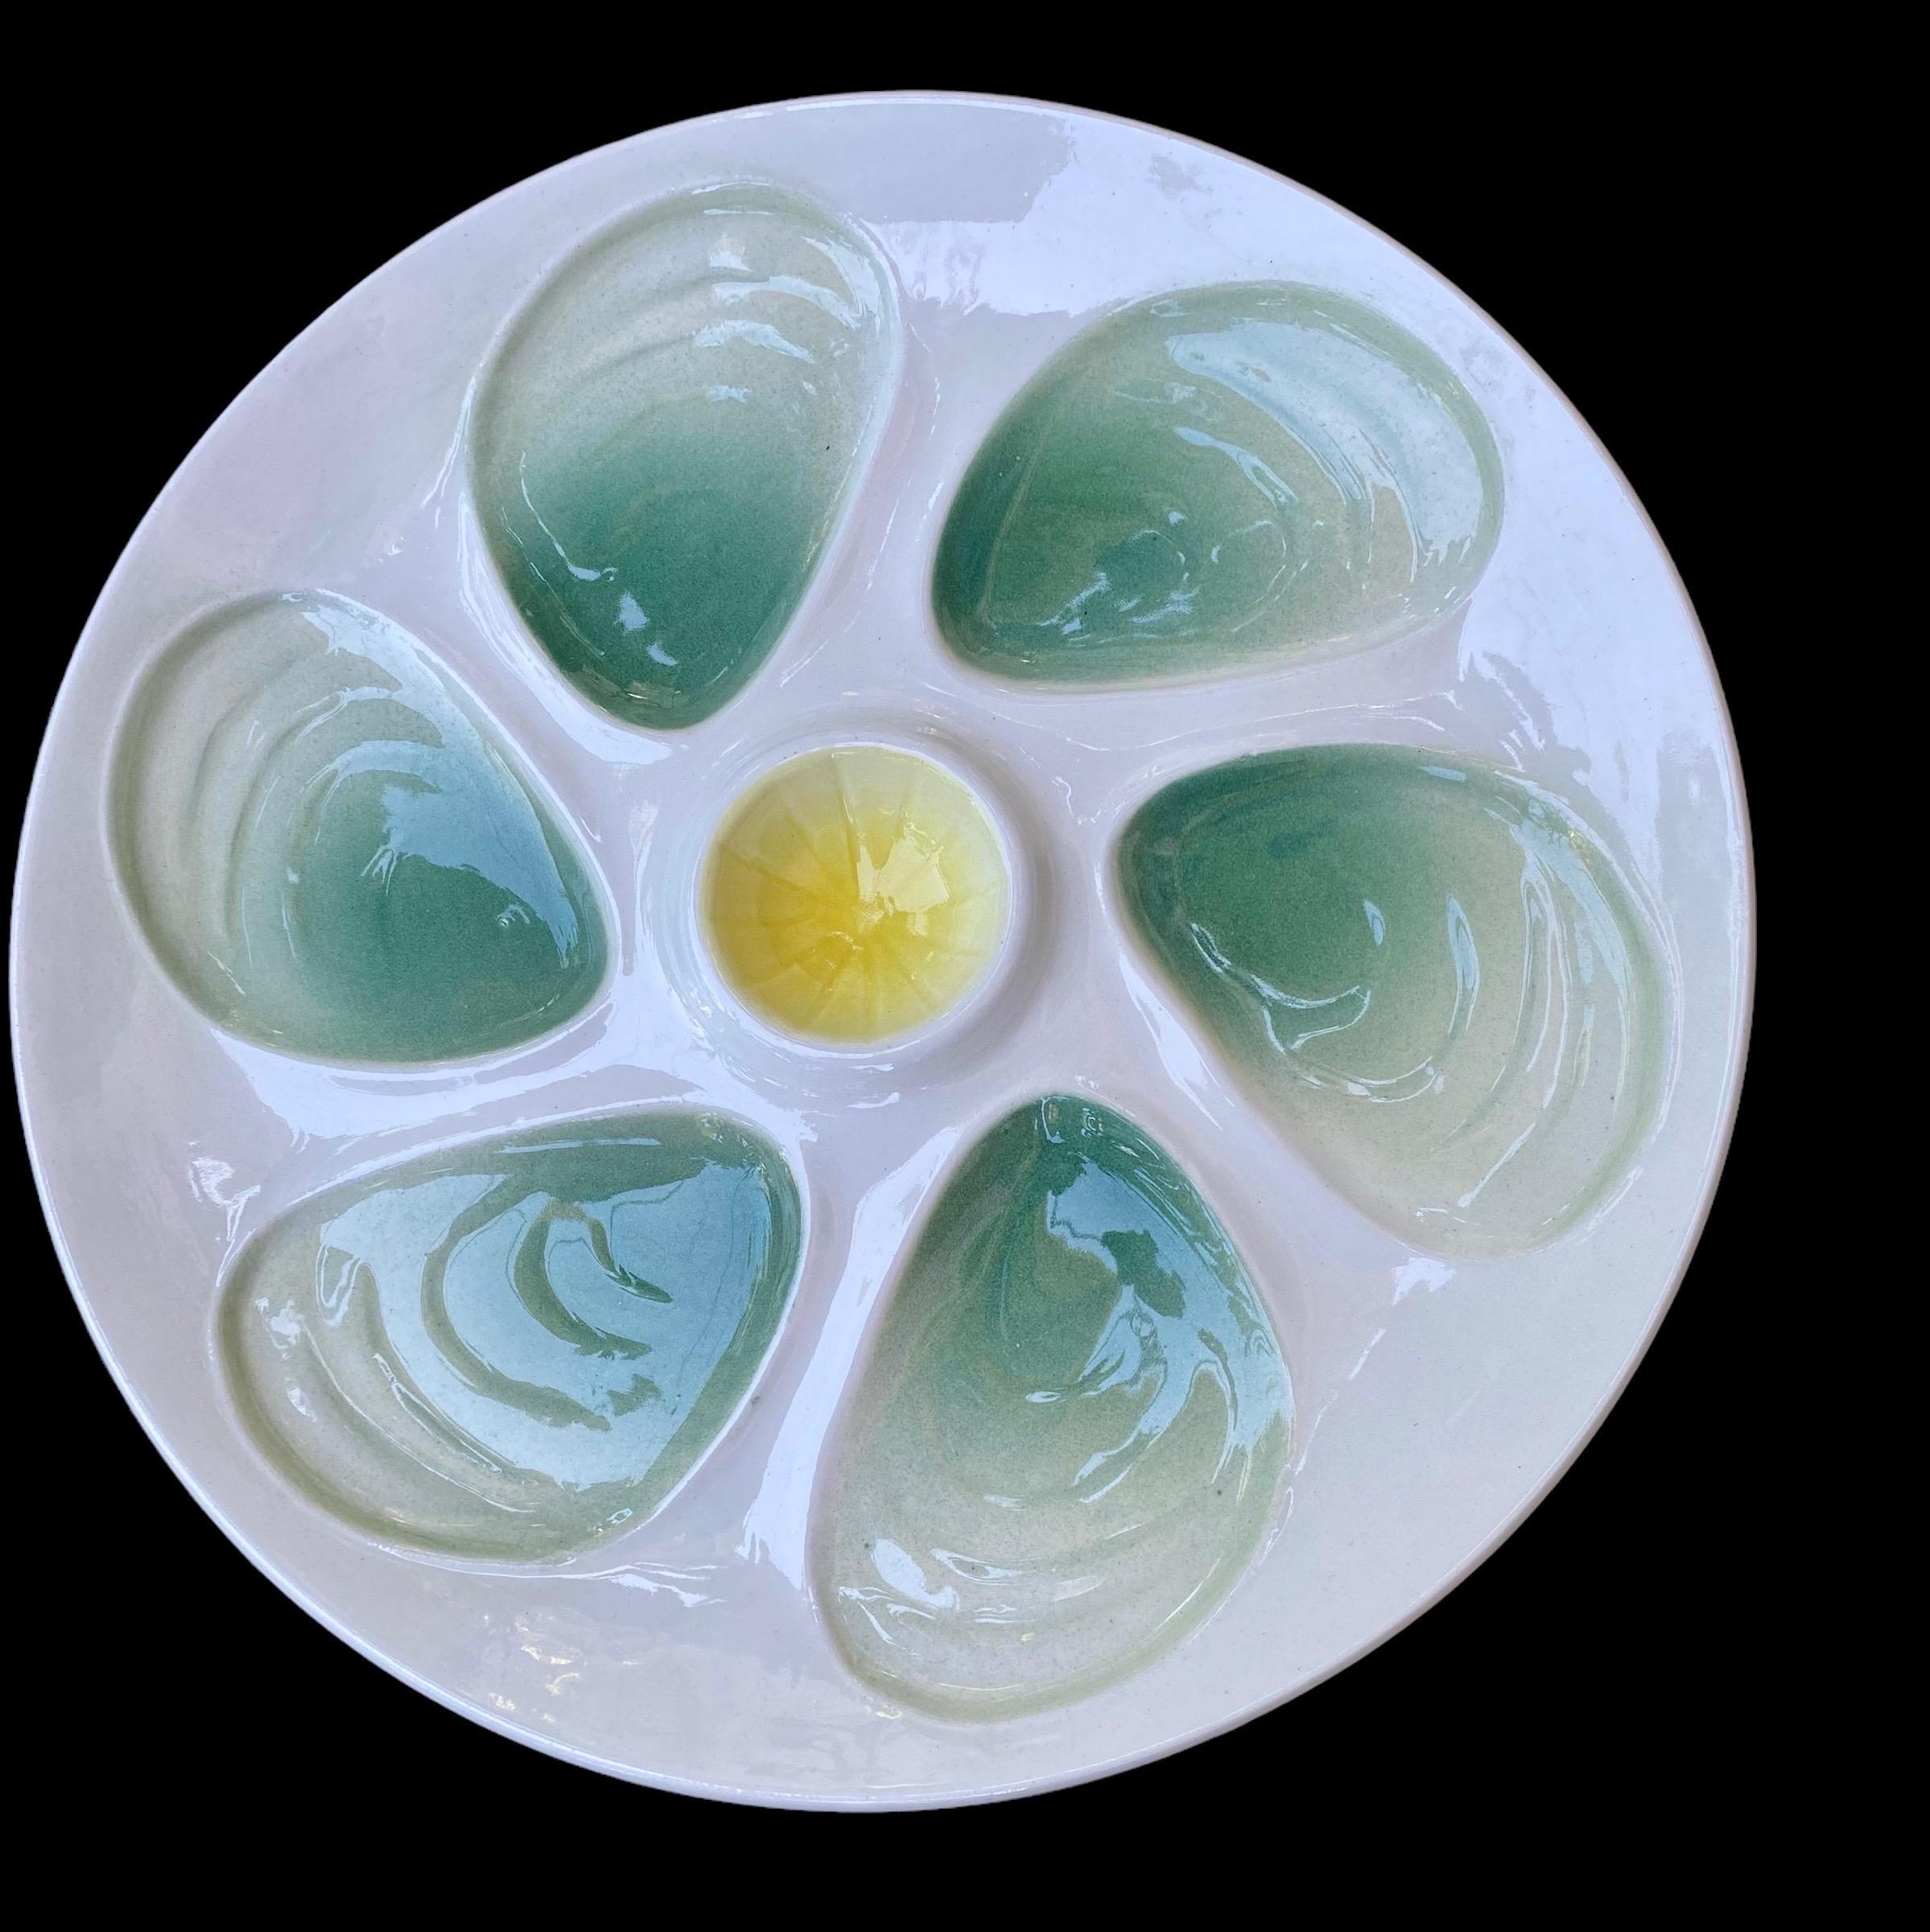 French Salins Seafoam Green Mid
Century Hand Painted Faience Majolica
Oyster Plates.
An oyster plate collectors 